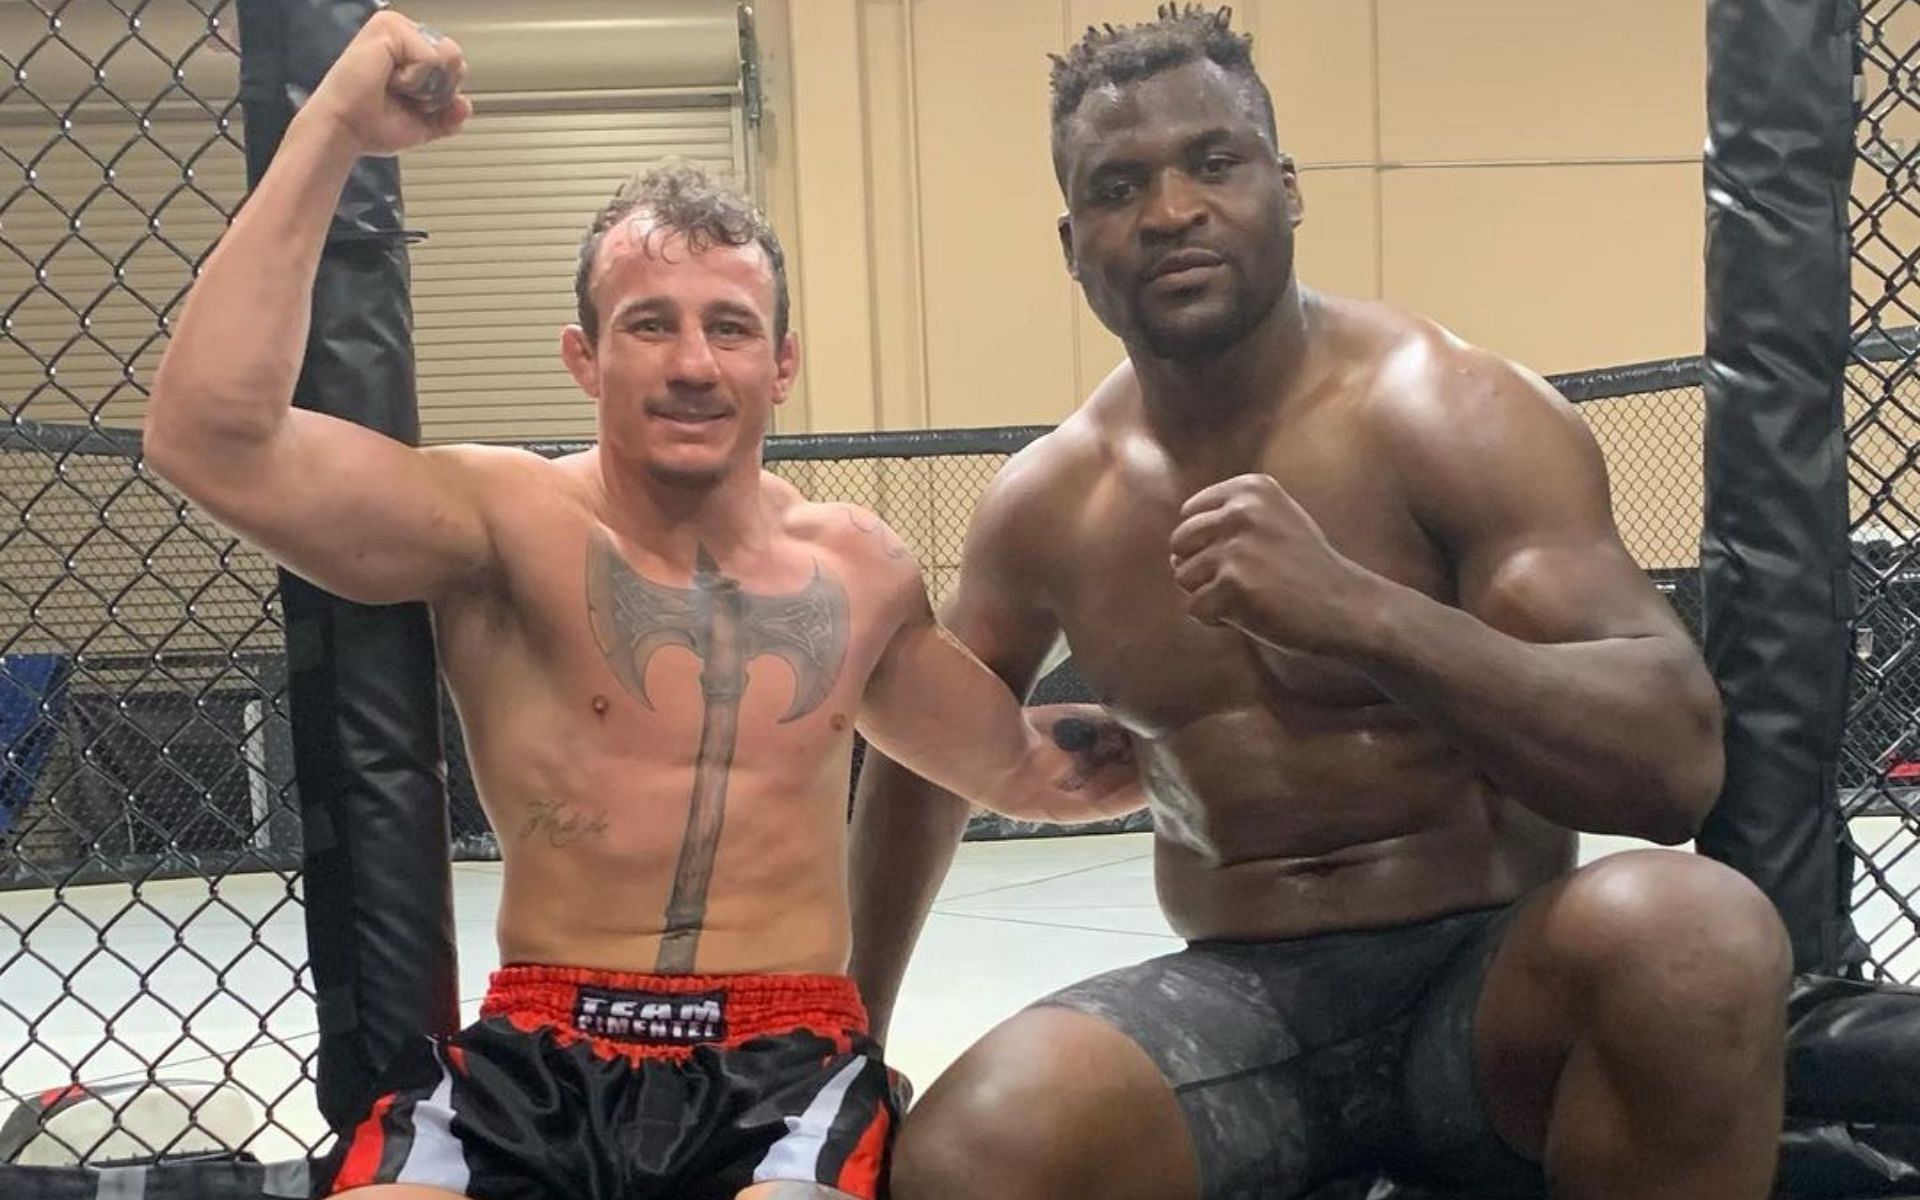 Deceased MMA fighter Mauro Chaulet (left), with Francis Ngannou (right) [Image courtesy: @maurochaulet on Instagram]